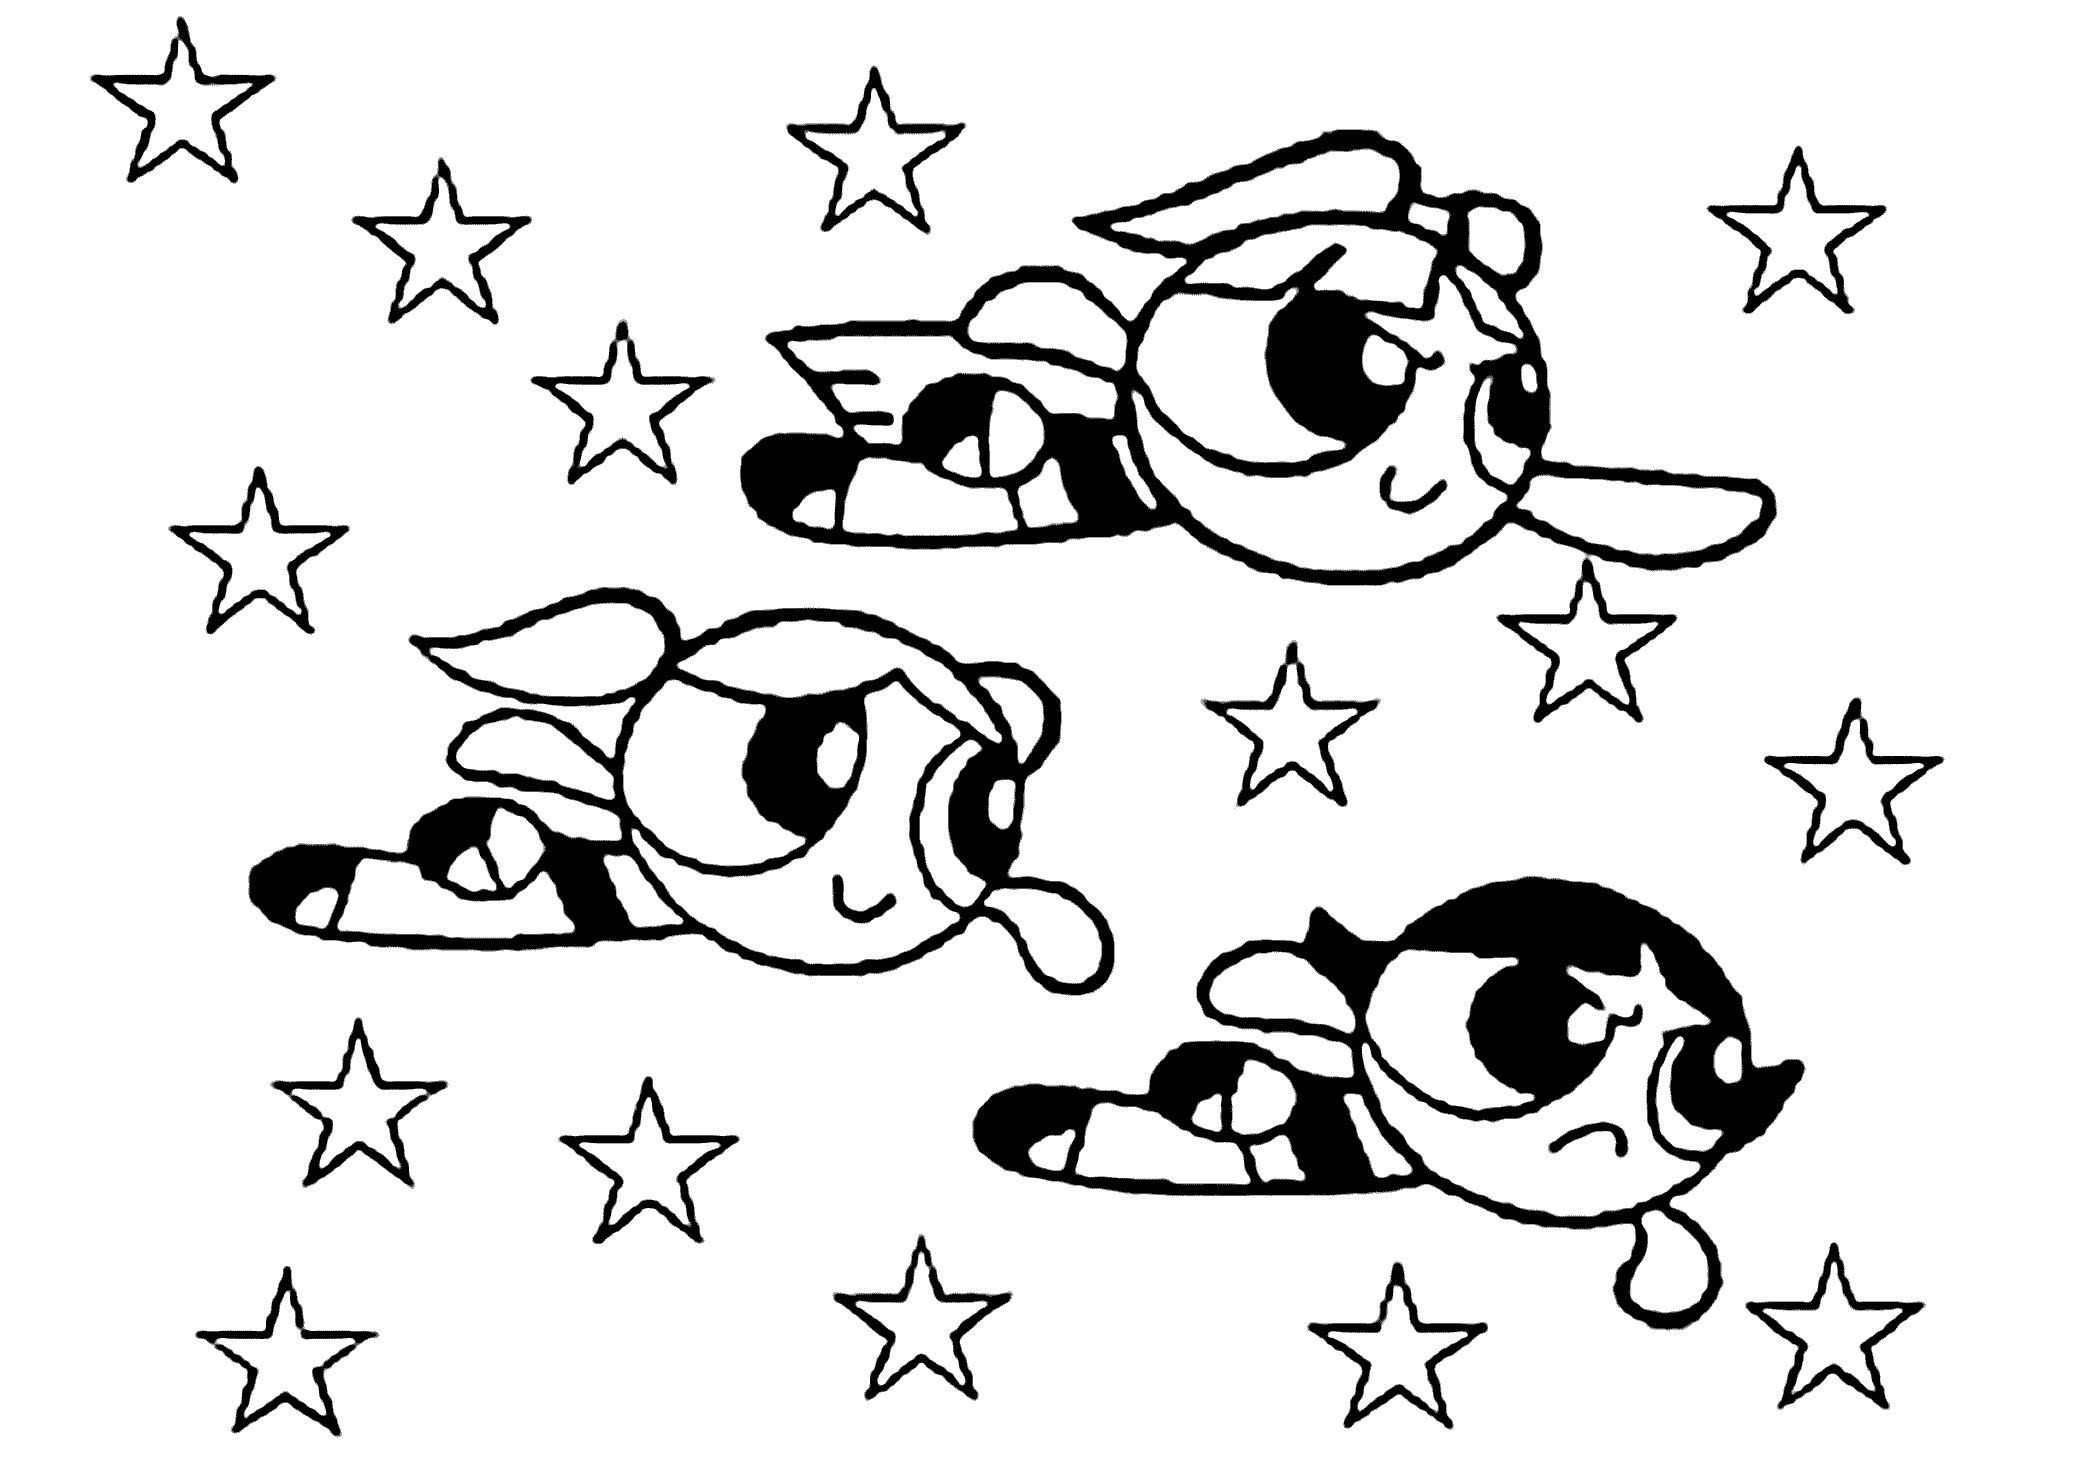 Powerpuff Girls Brothers Coloring Pages
 Powerpuff girls flying coloring pages for kids printable